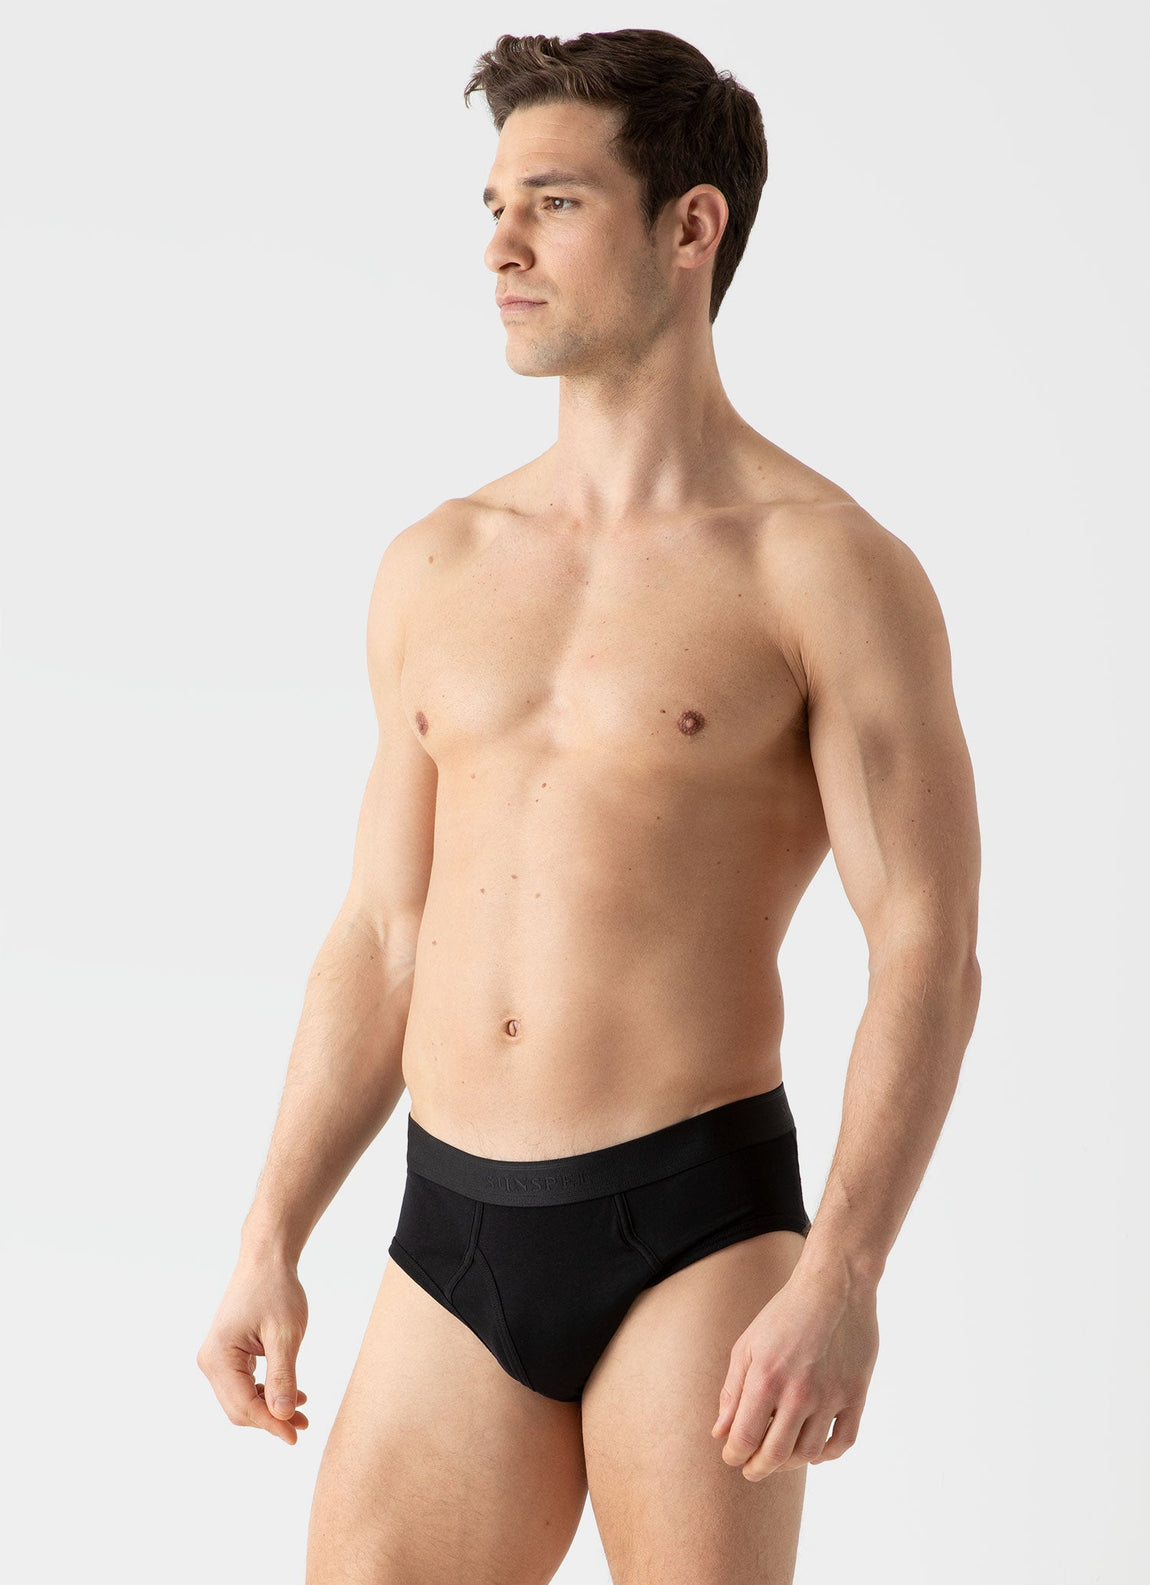 Buy F A S O 100% Organic Cotton Trunk for Men